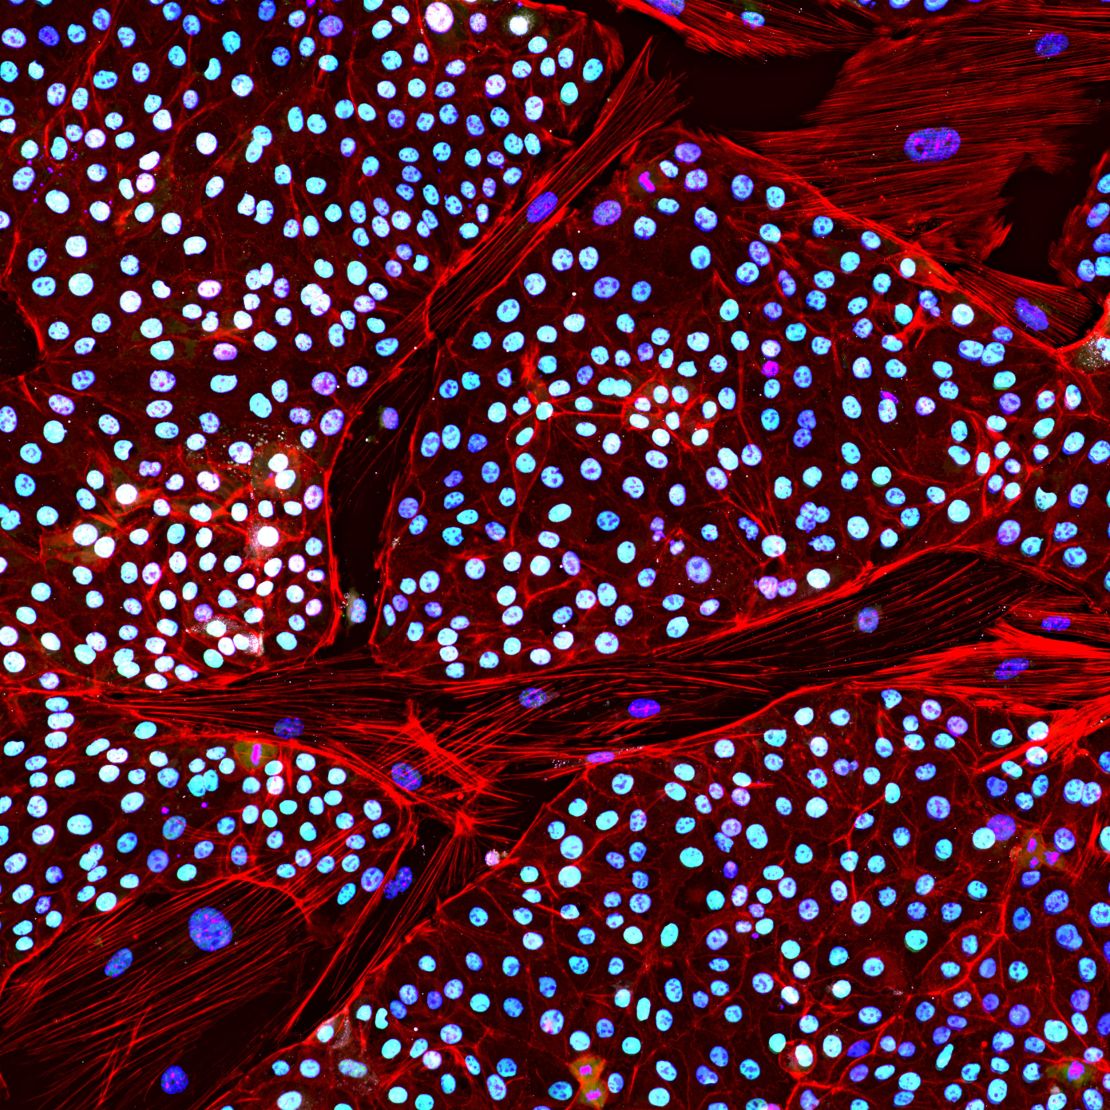 An Asian elephant stem cell line stained in different colors to highlight different elements.